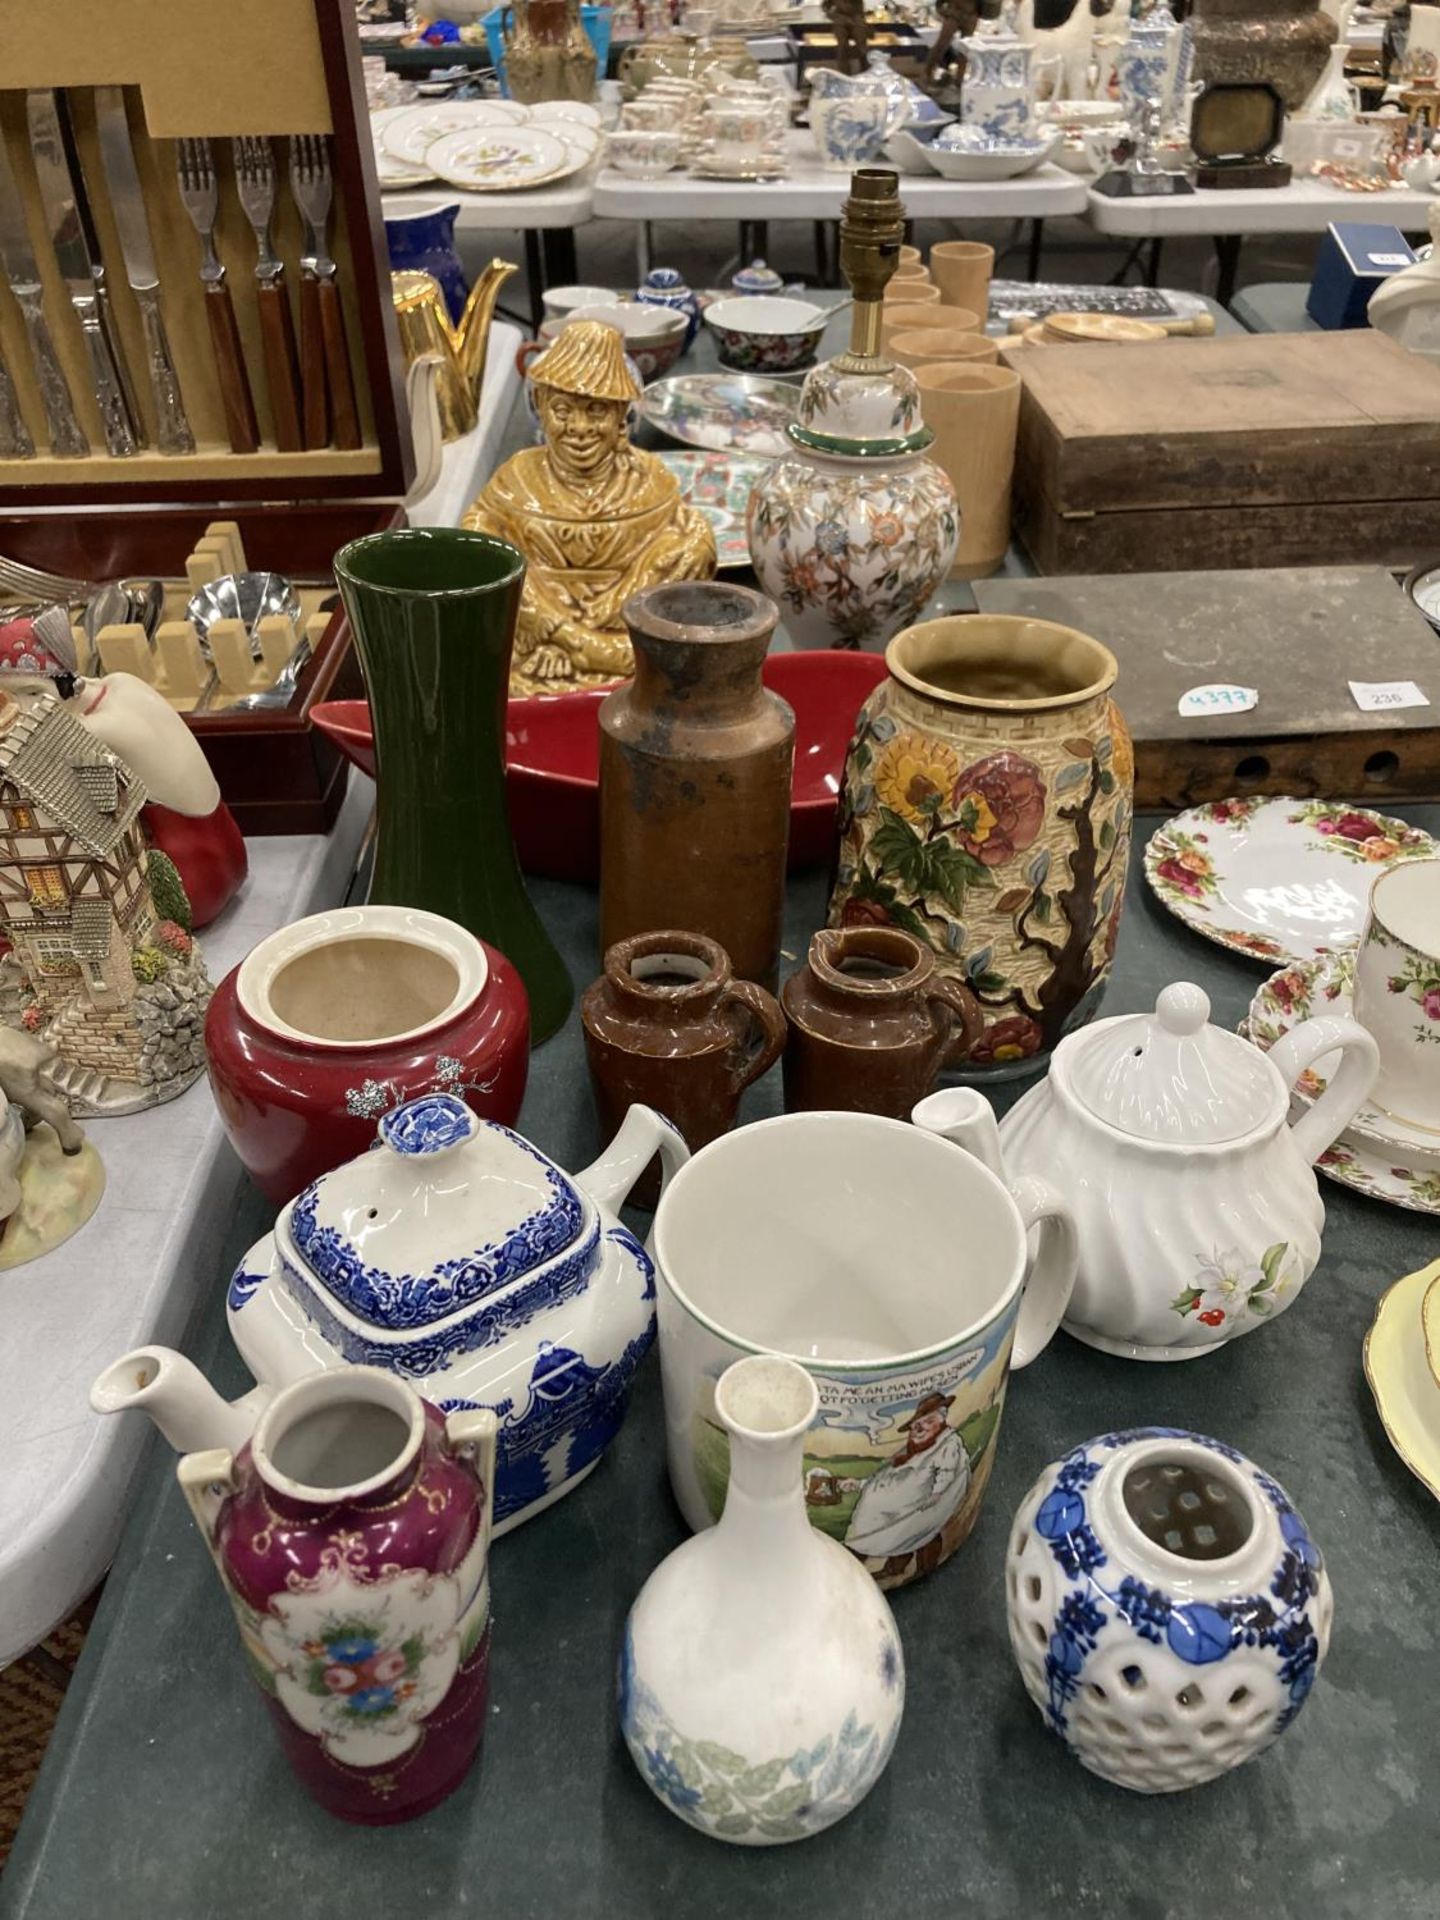 A MIXED LOT OF CERAMICS TO INCLUDE VASES, BOWLS, A SUGAR CANNISTER, TEAPOTS, STONEWARE BOTTLES, ETC